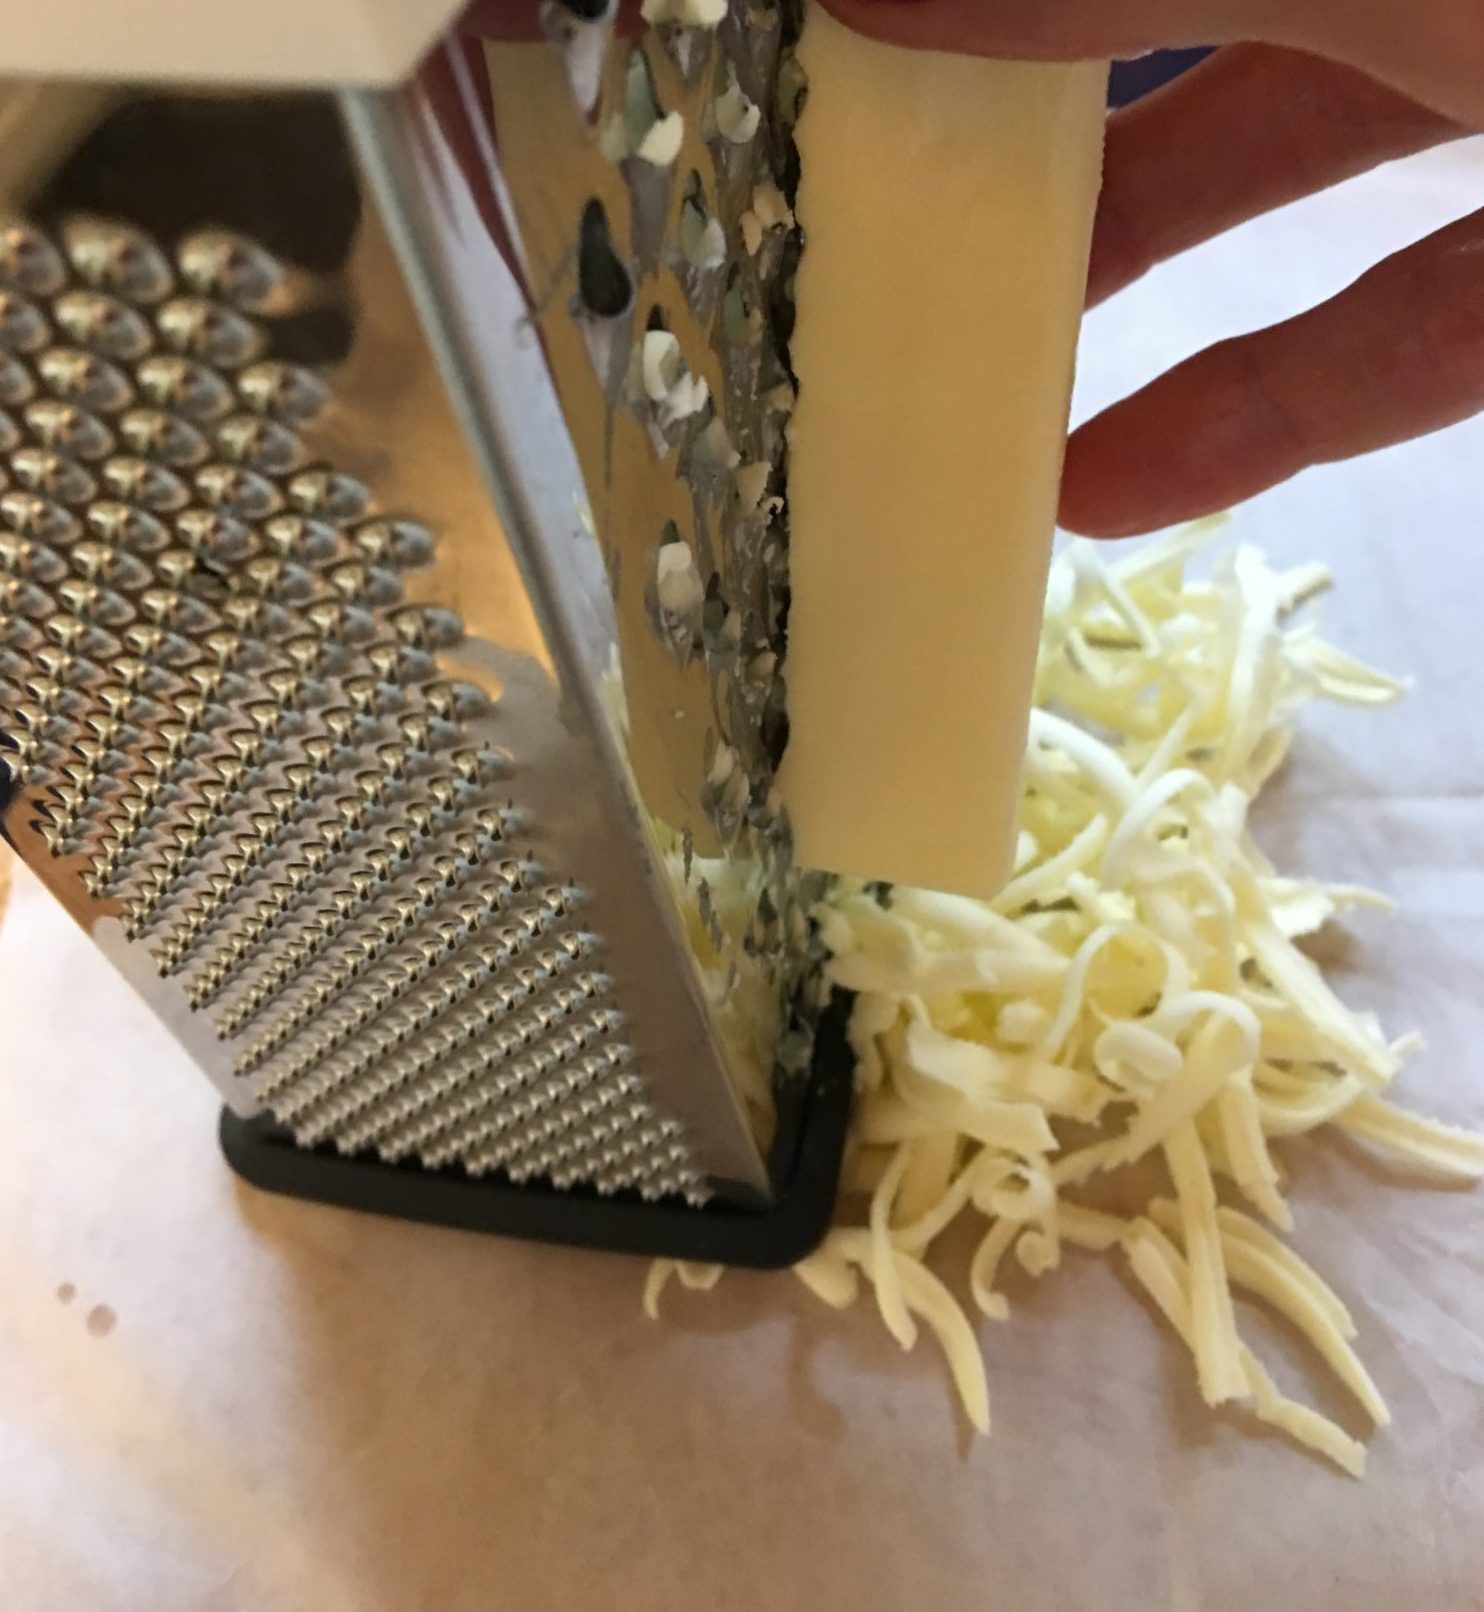 Butter being grated